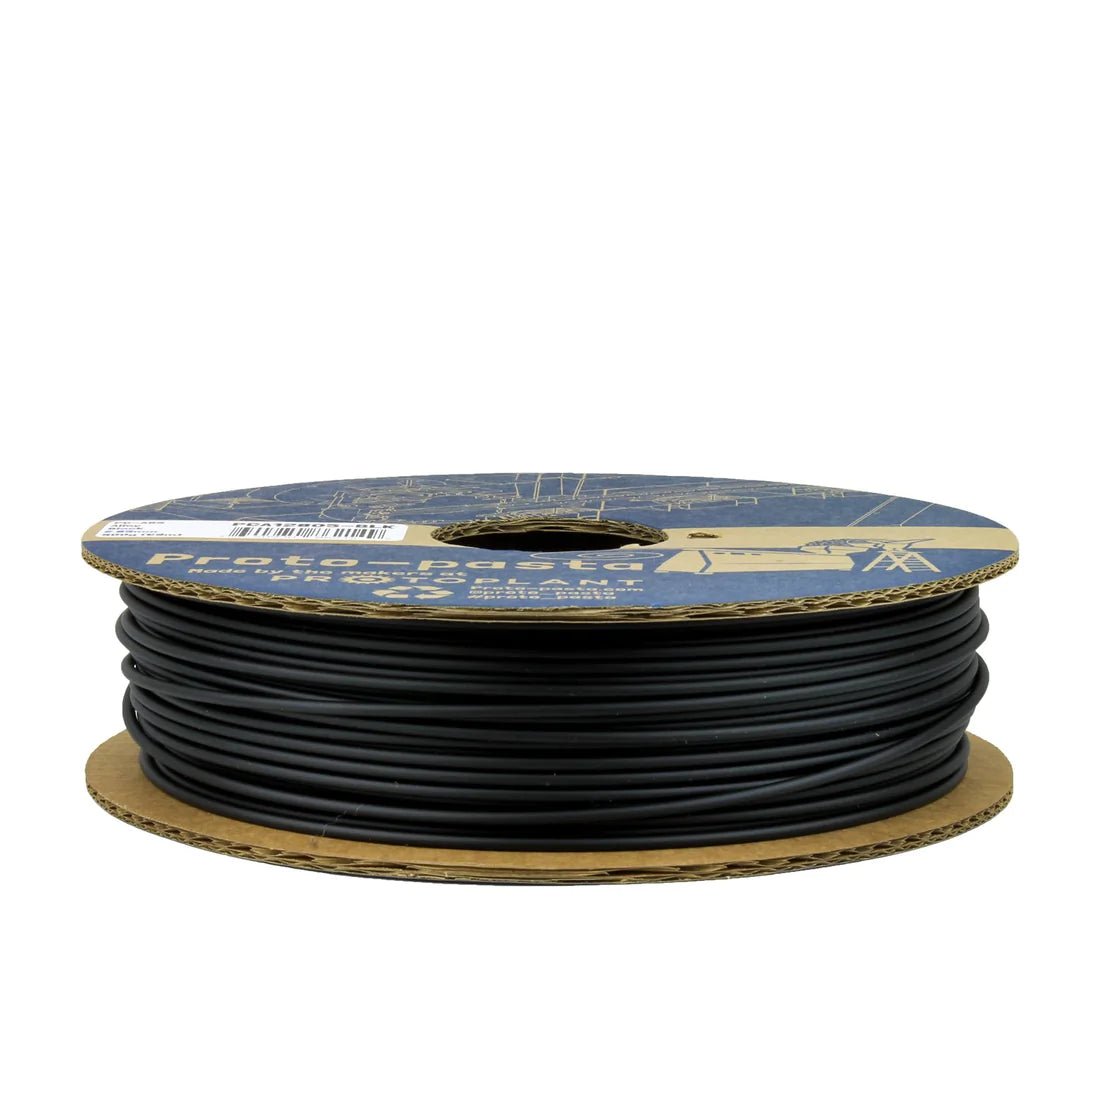 ProtoPasta High Temperature PC-ABS Alloy Filament 1.75mm (Cardboard Spools - 500g) Polycarbonate-ABS Alloy - West3D Printing - ProtoPasta